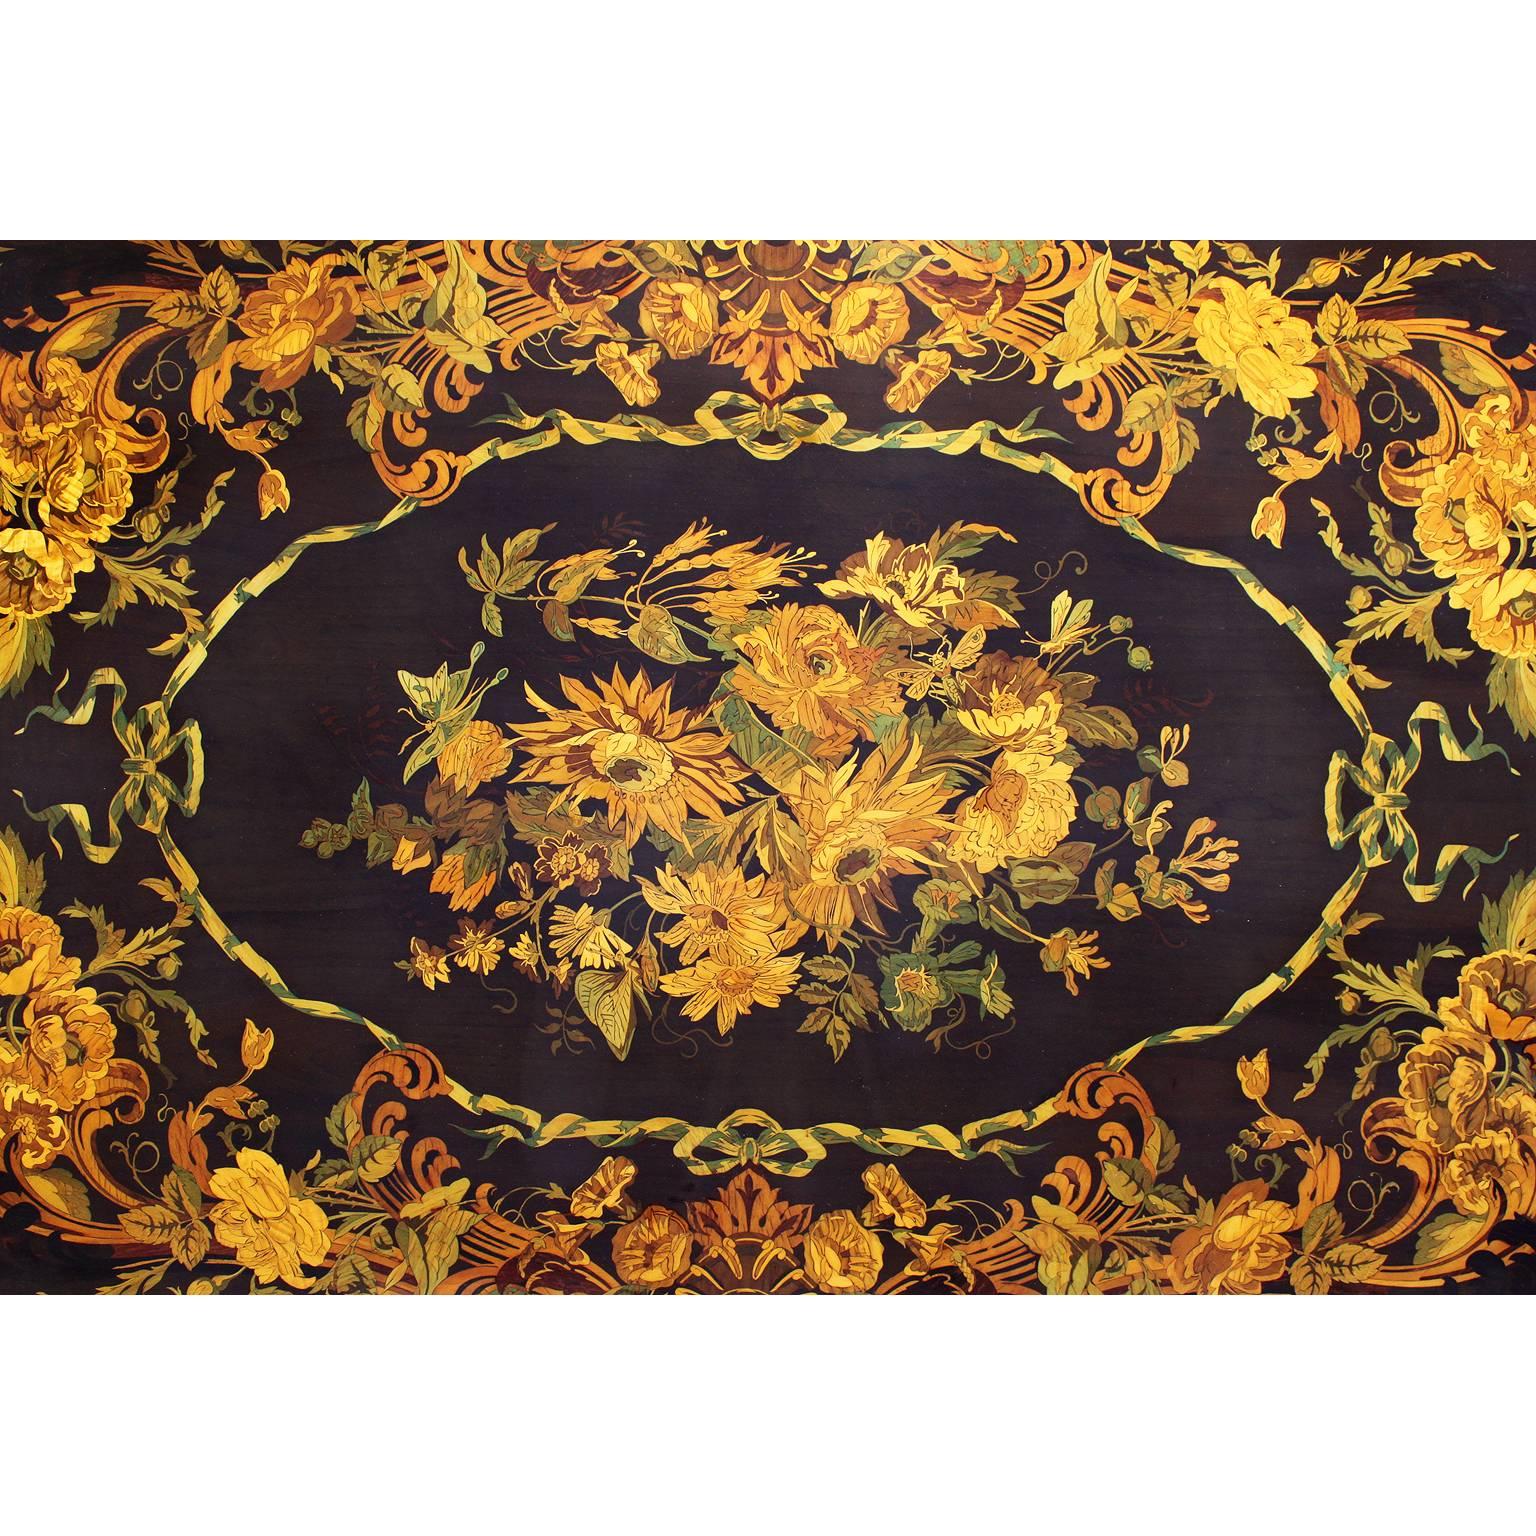 Carved Fine Italian 19th Century Floral Marquetry and Gilt-Bronze Mounted Centre Table